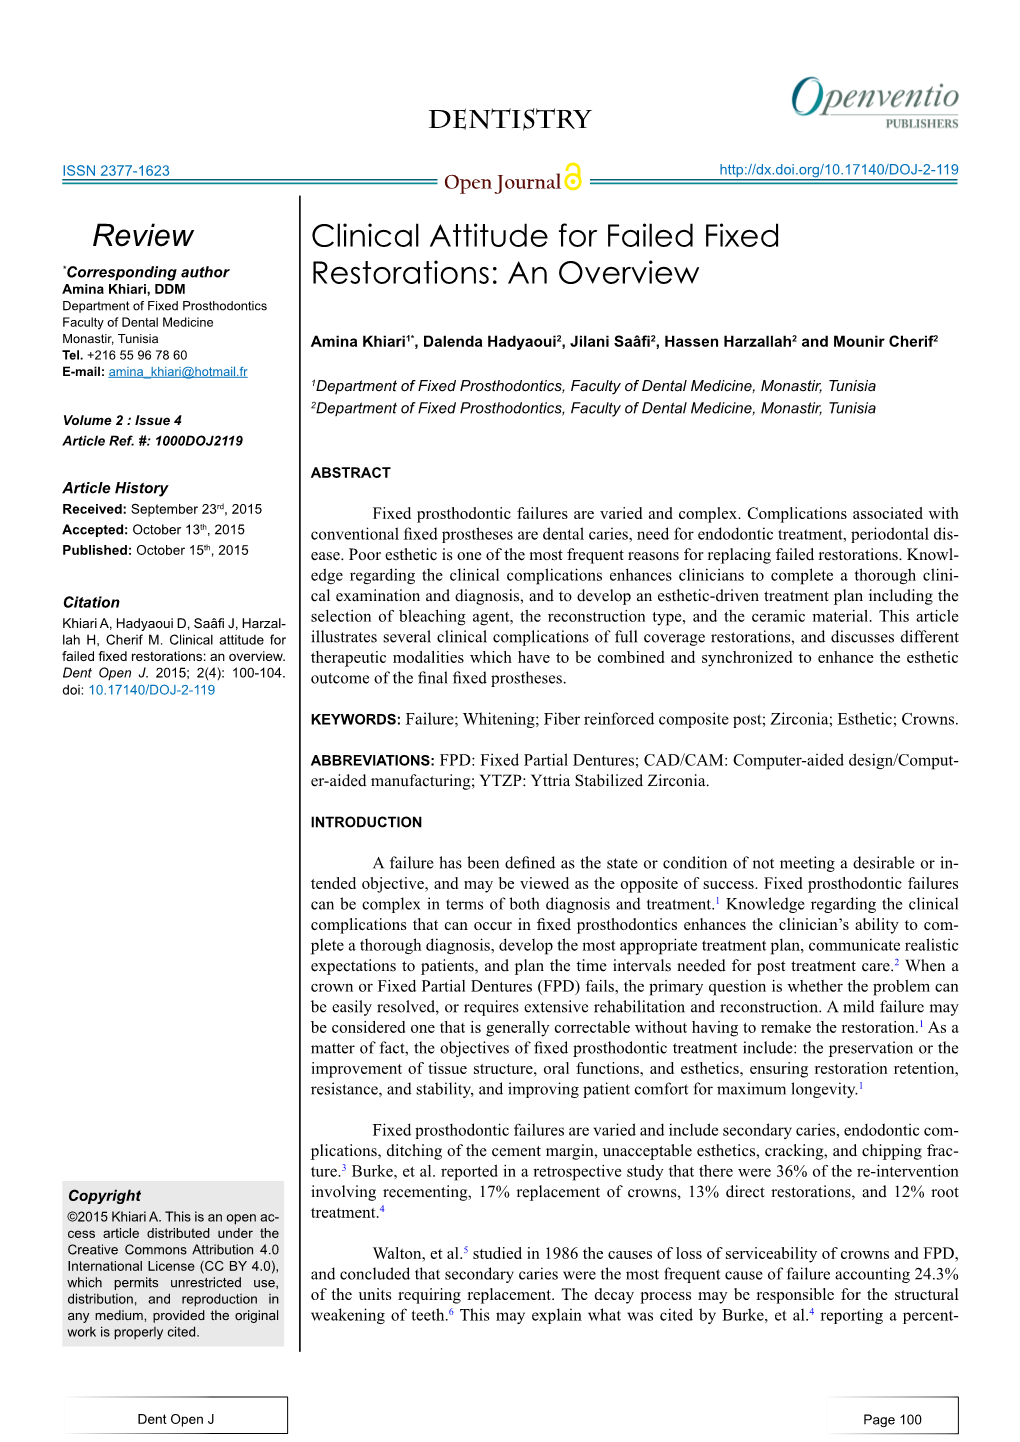 Clinical Attitude for Failed Fixed Restorations: an Overview Review